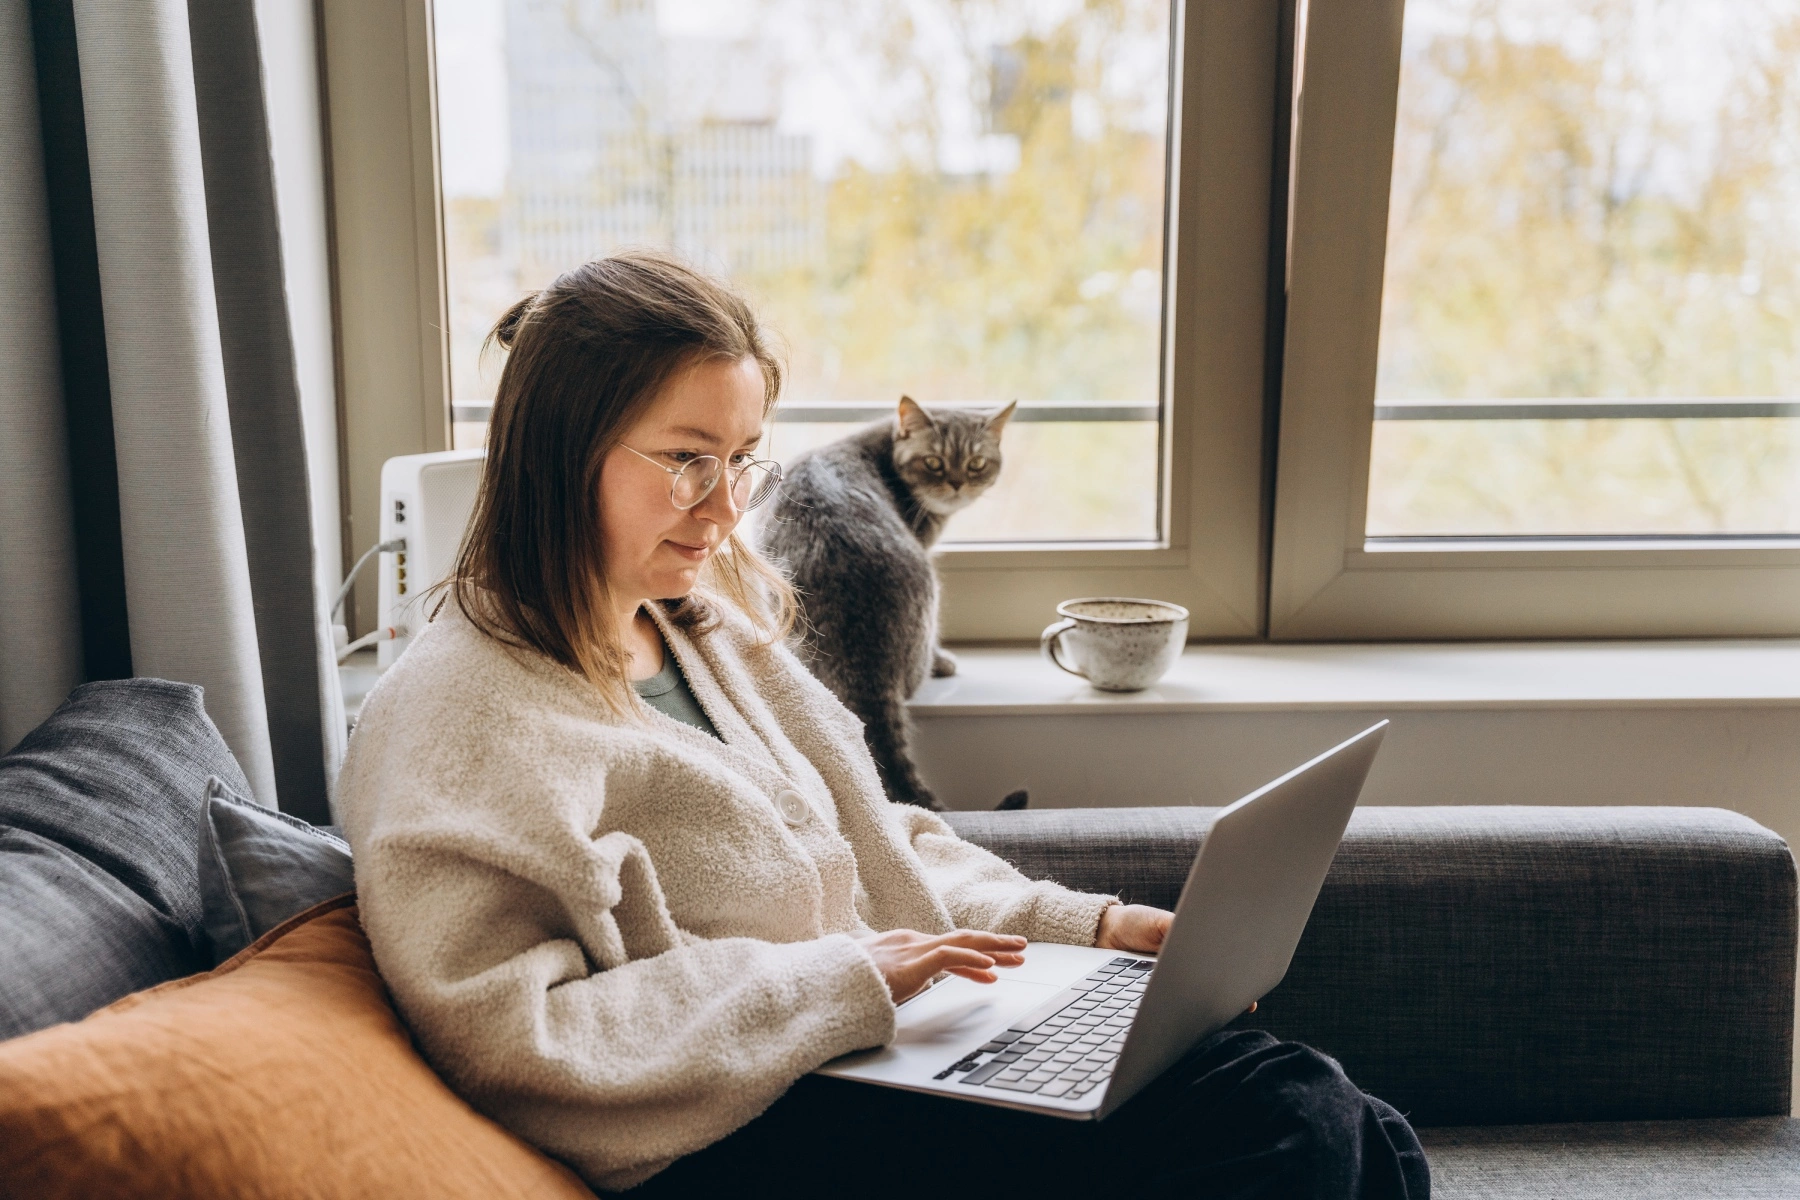 a woman sitting on a sofa at home working on her laptop as her cat sits on the window ledge behind her